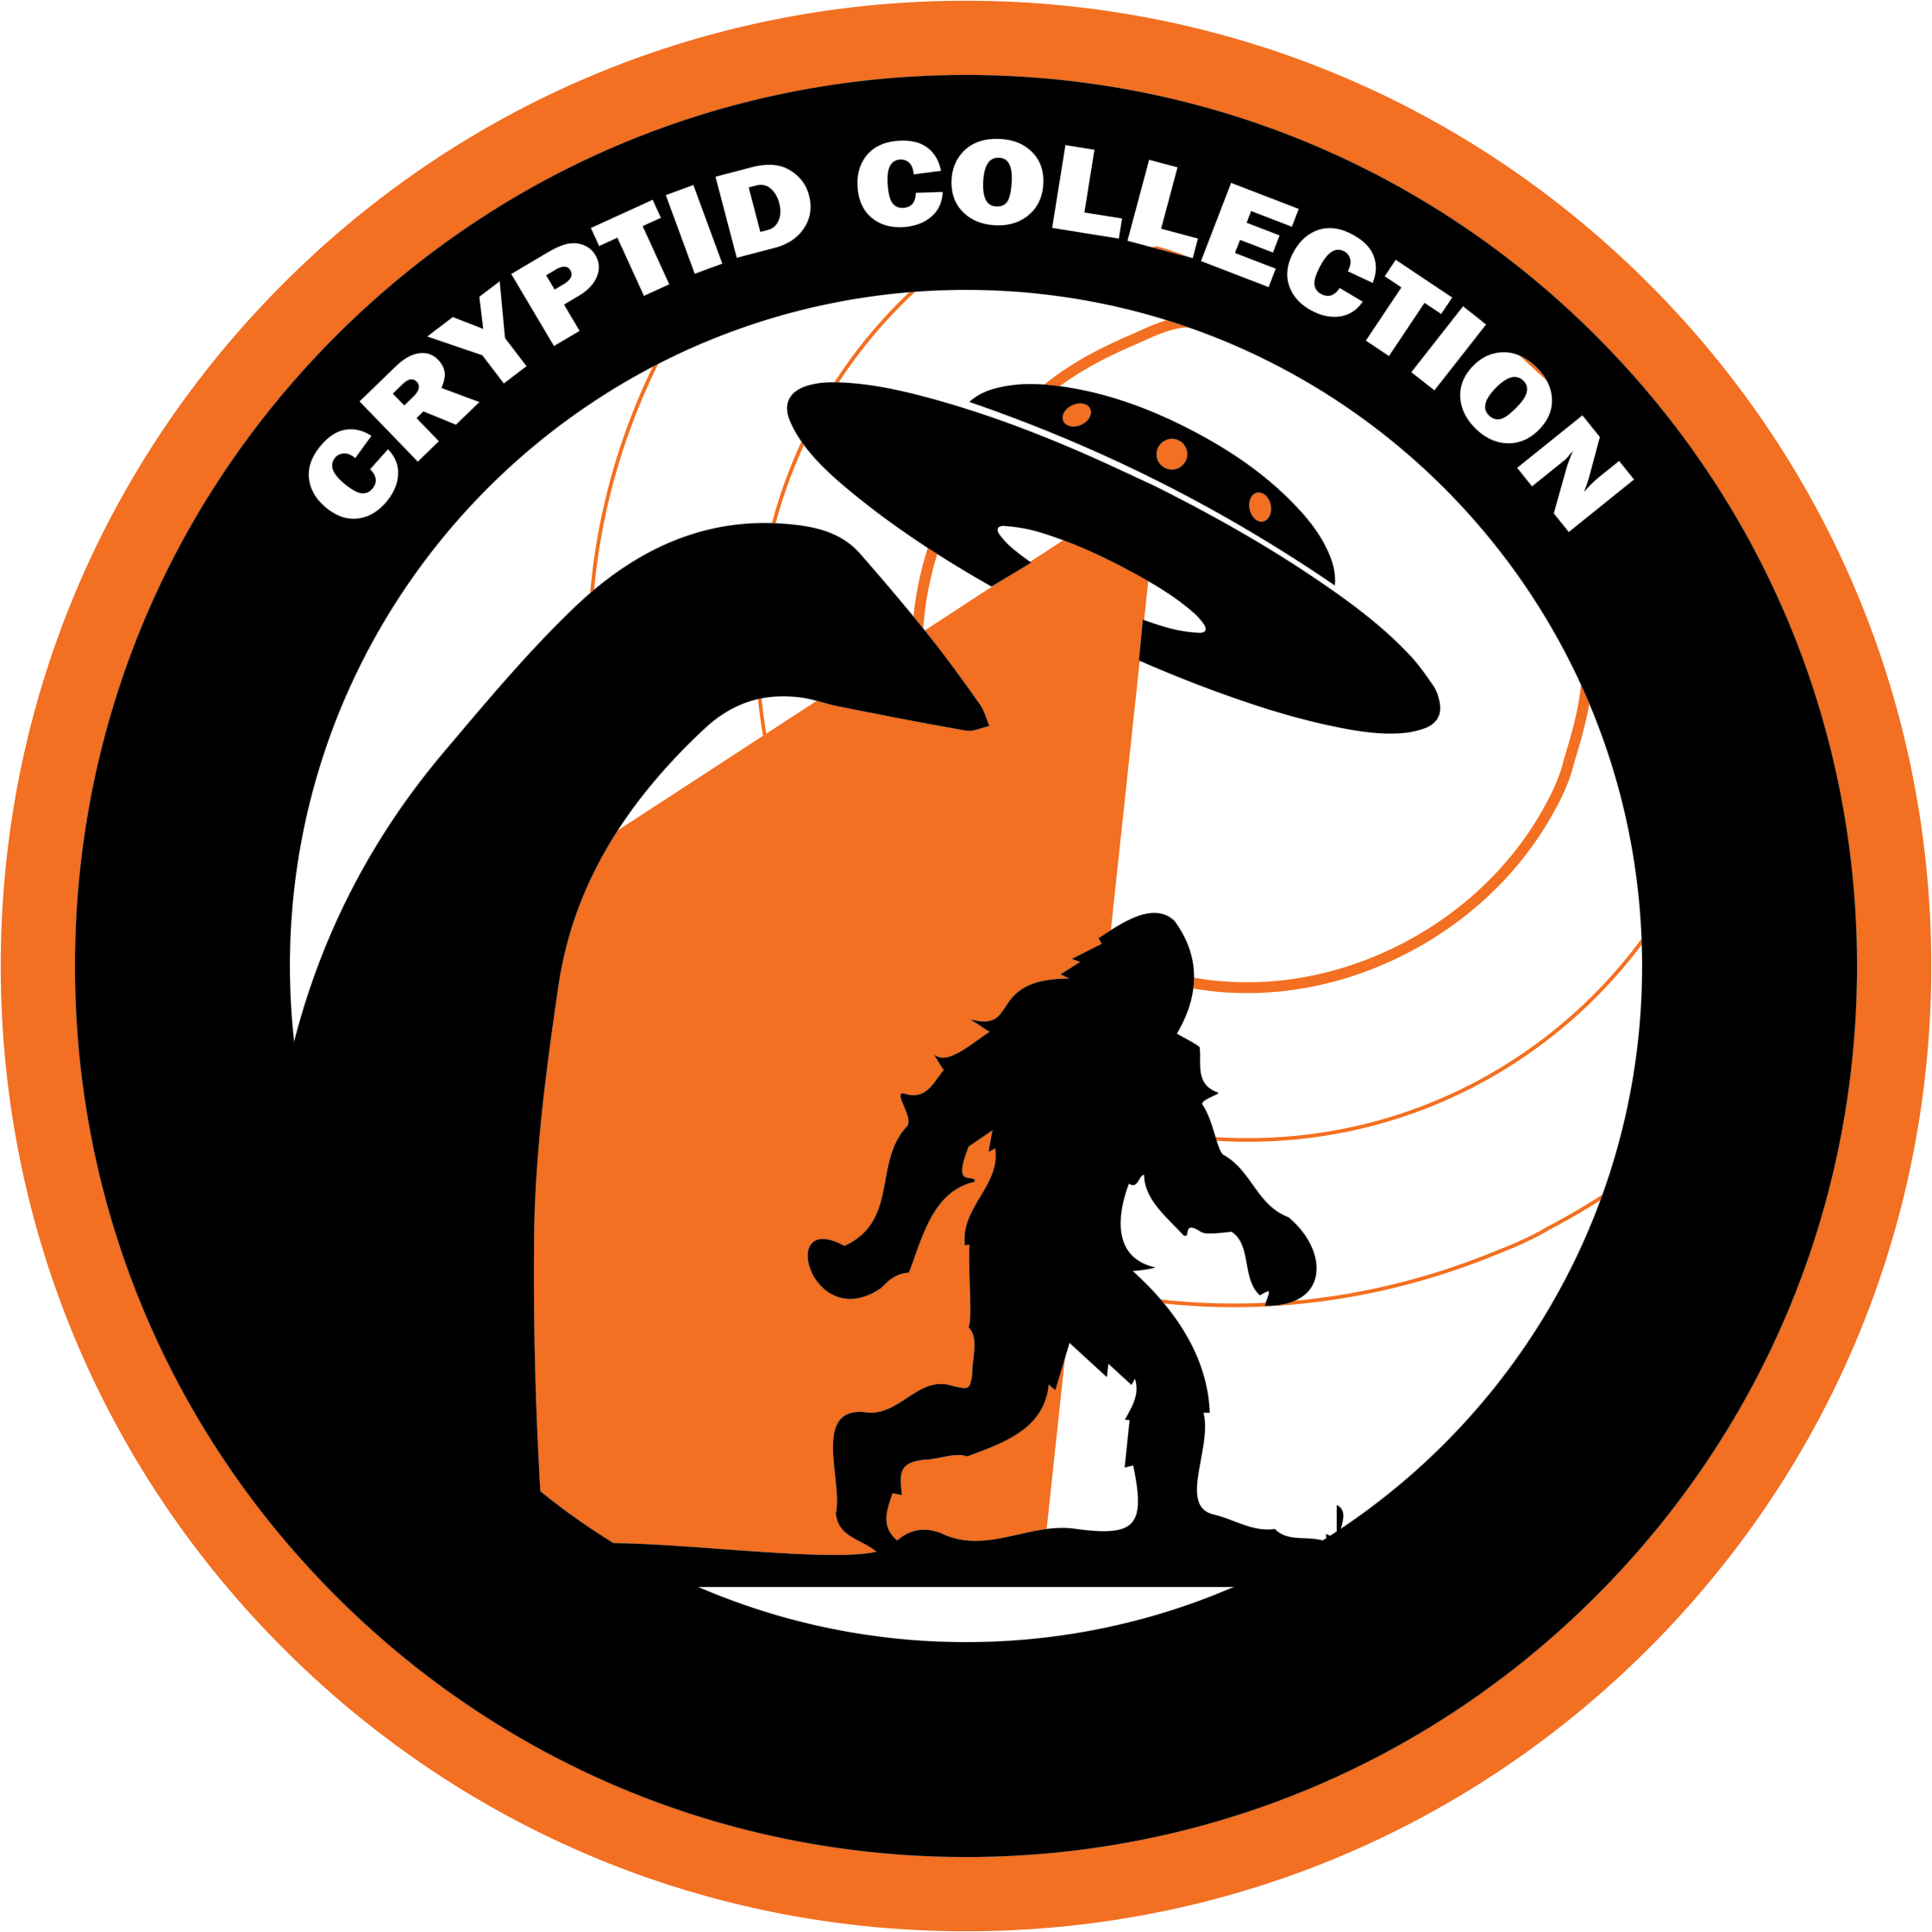 Cryptid Collection